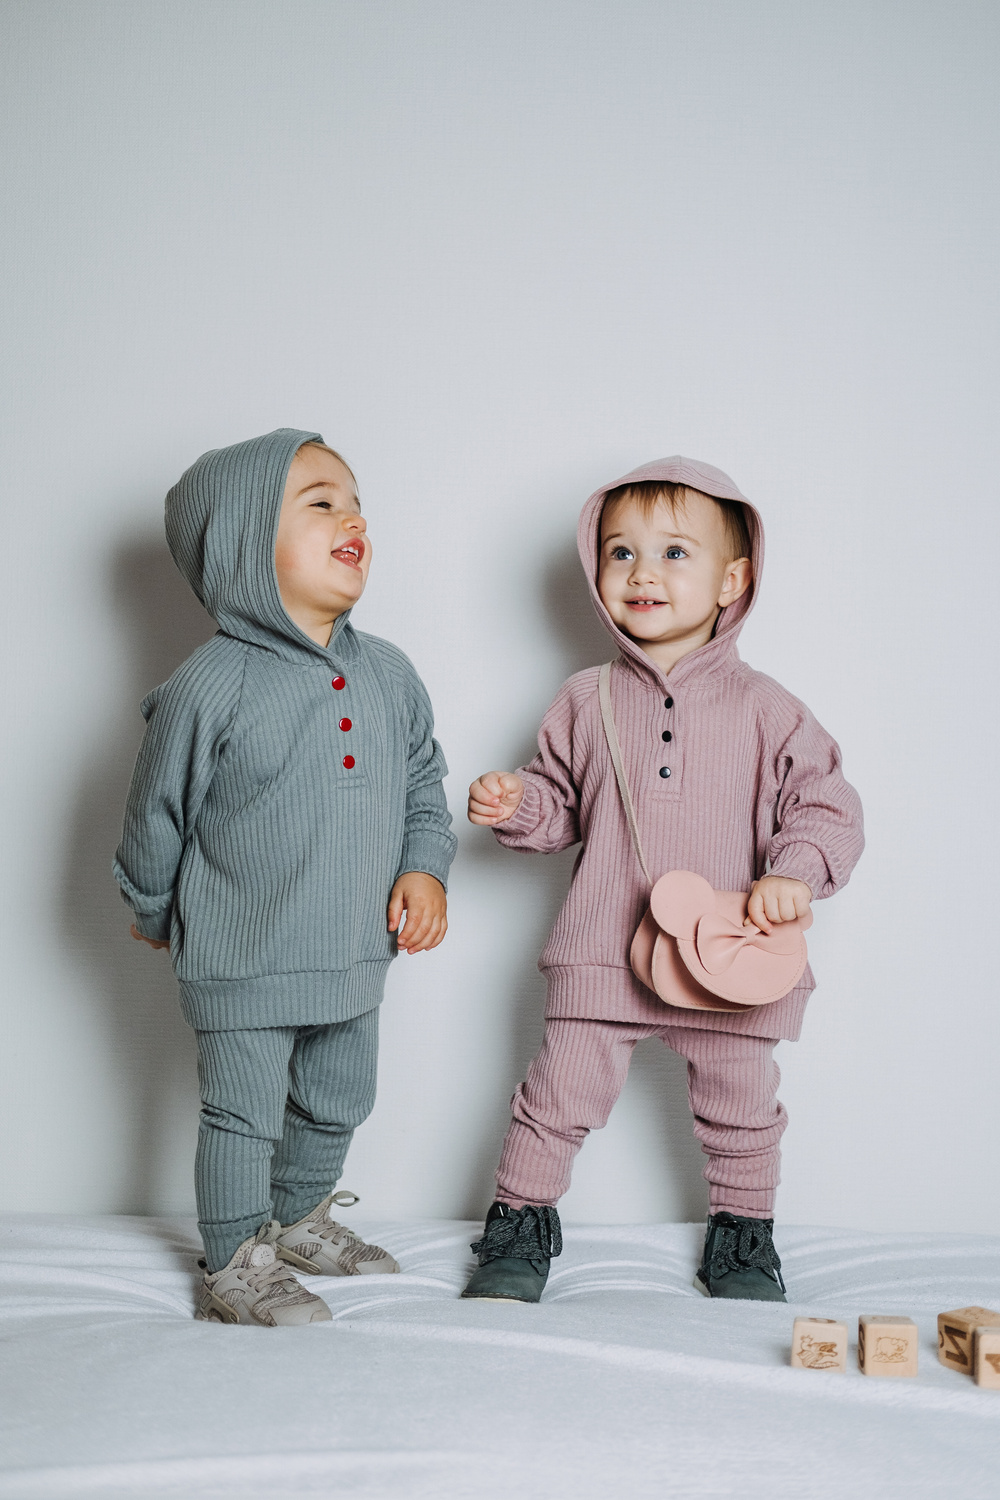 Baby fashion. Unisex clothes for babies. Two Cute baby girls